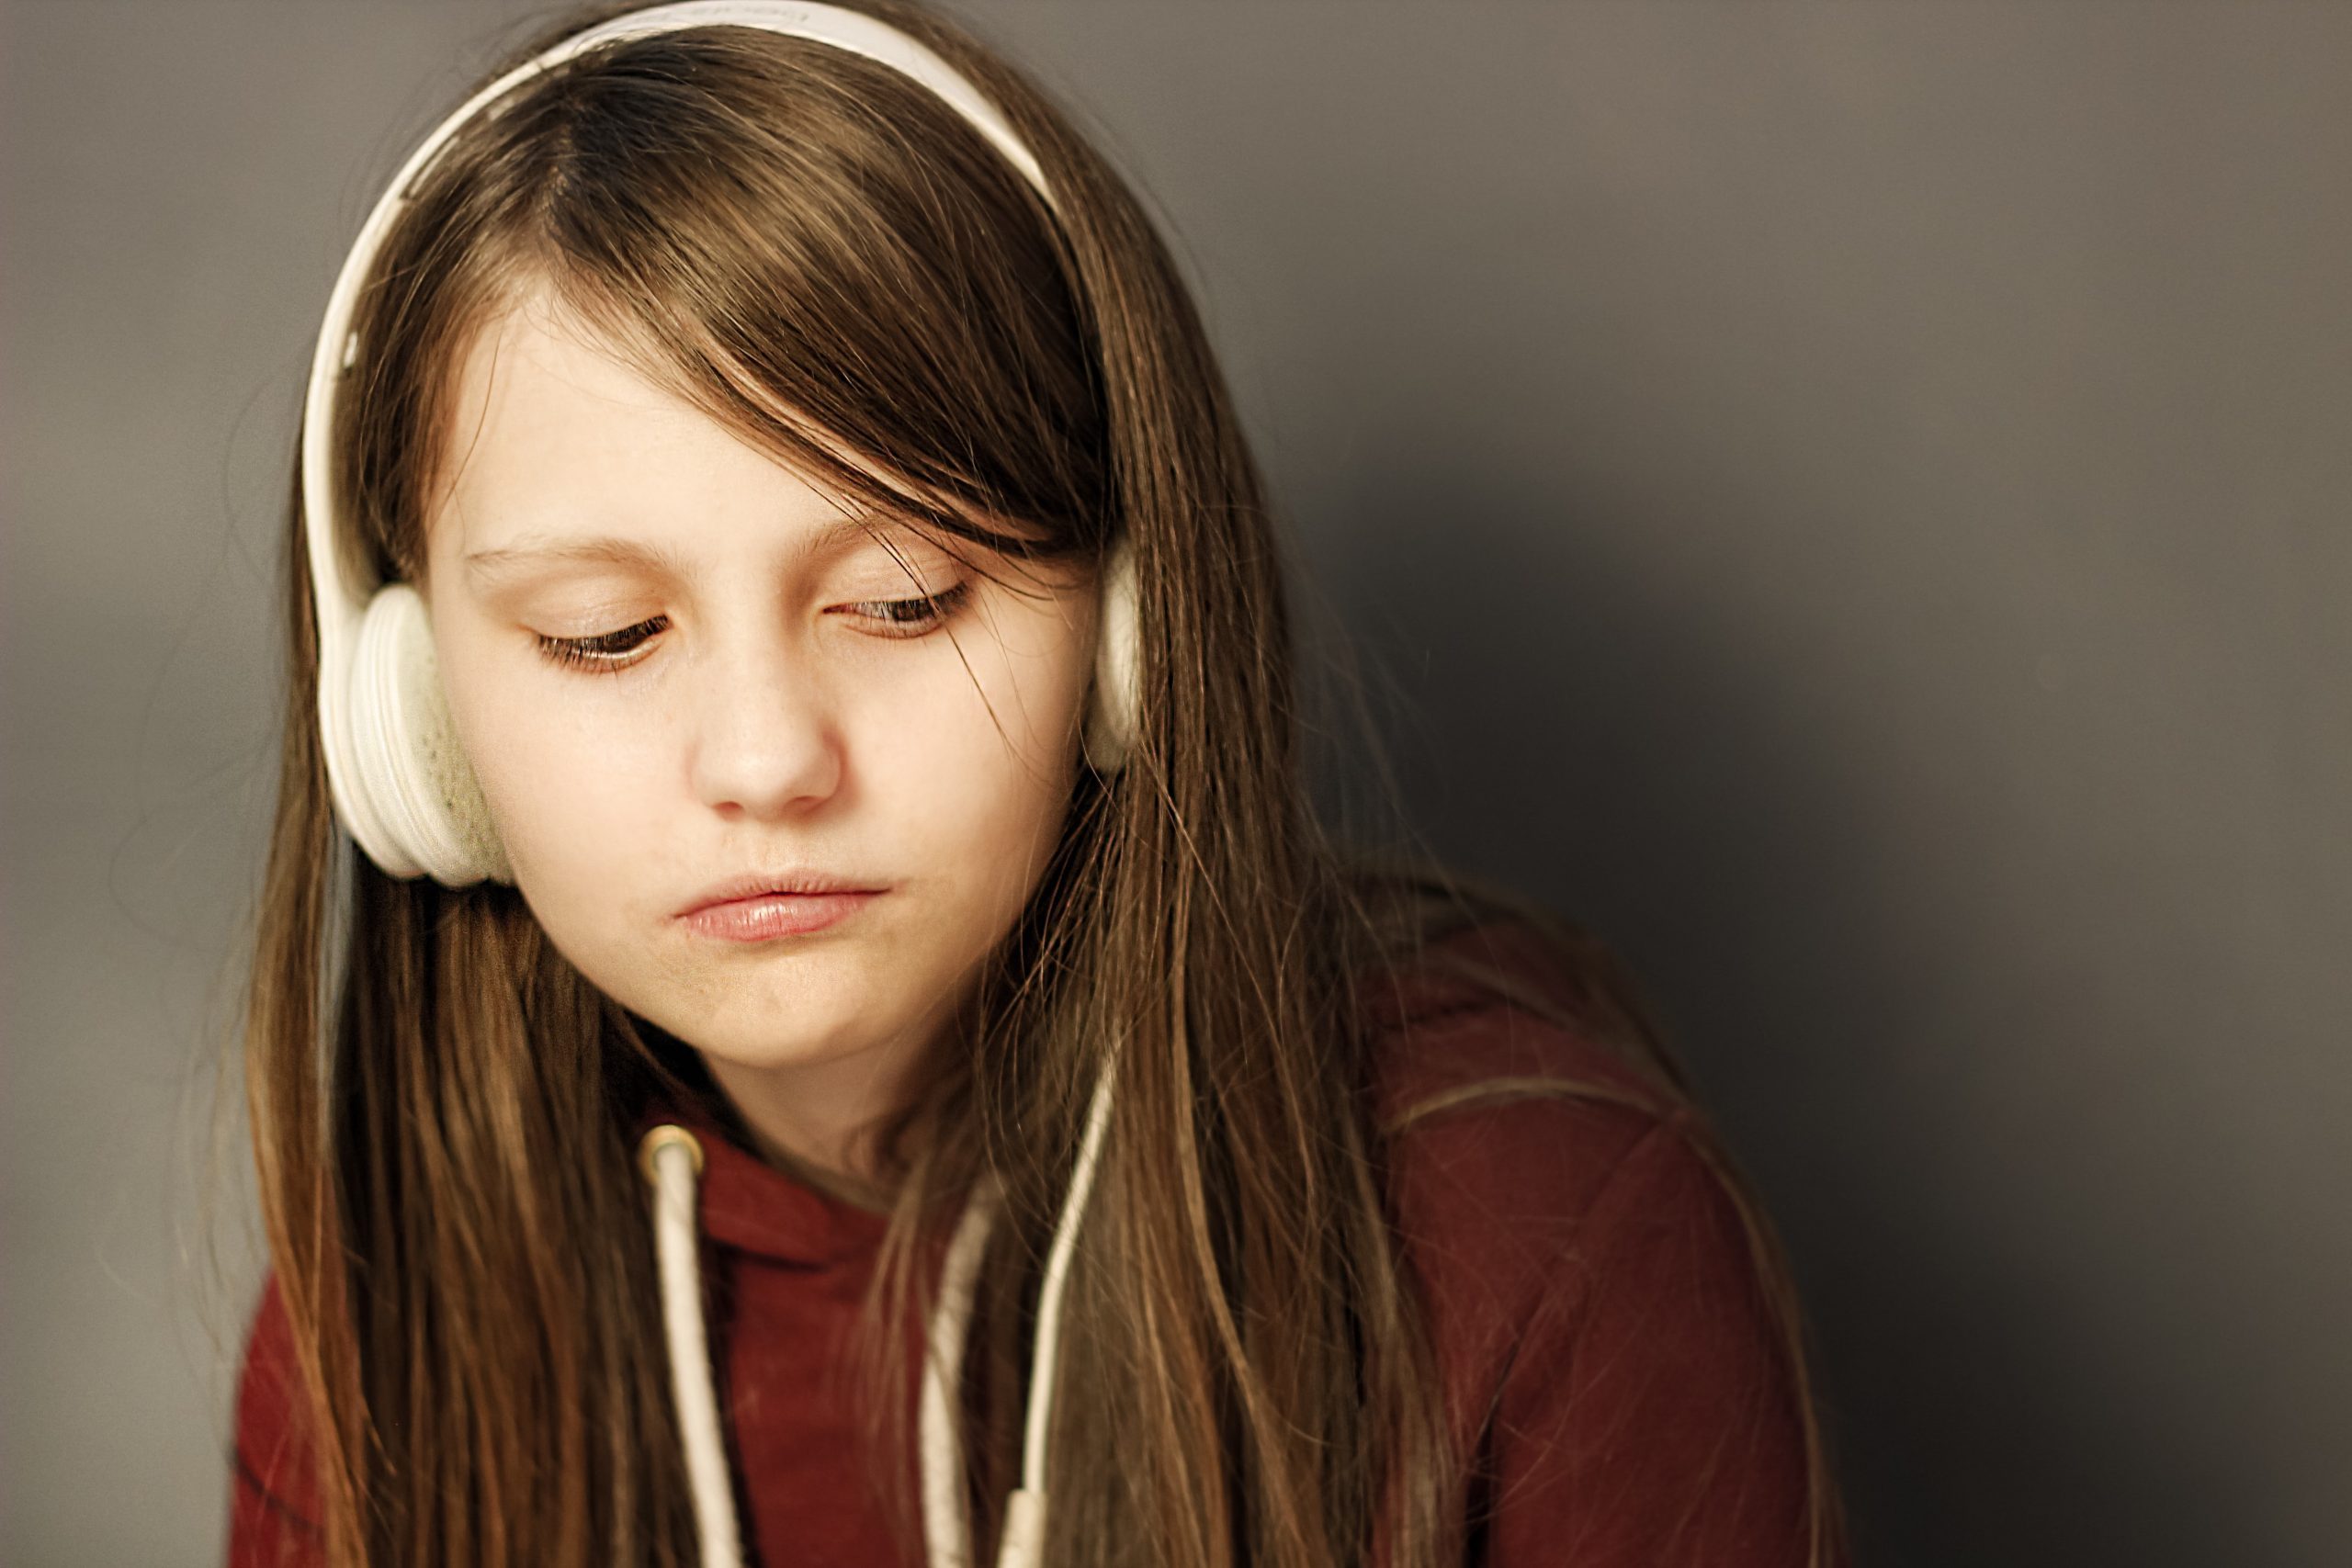 Young girl with dark hair and white headphones on looking sad